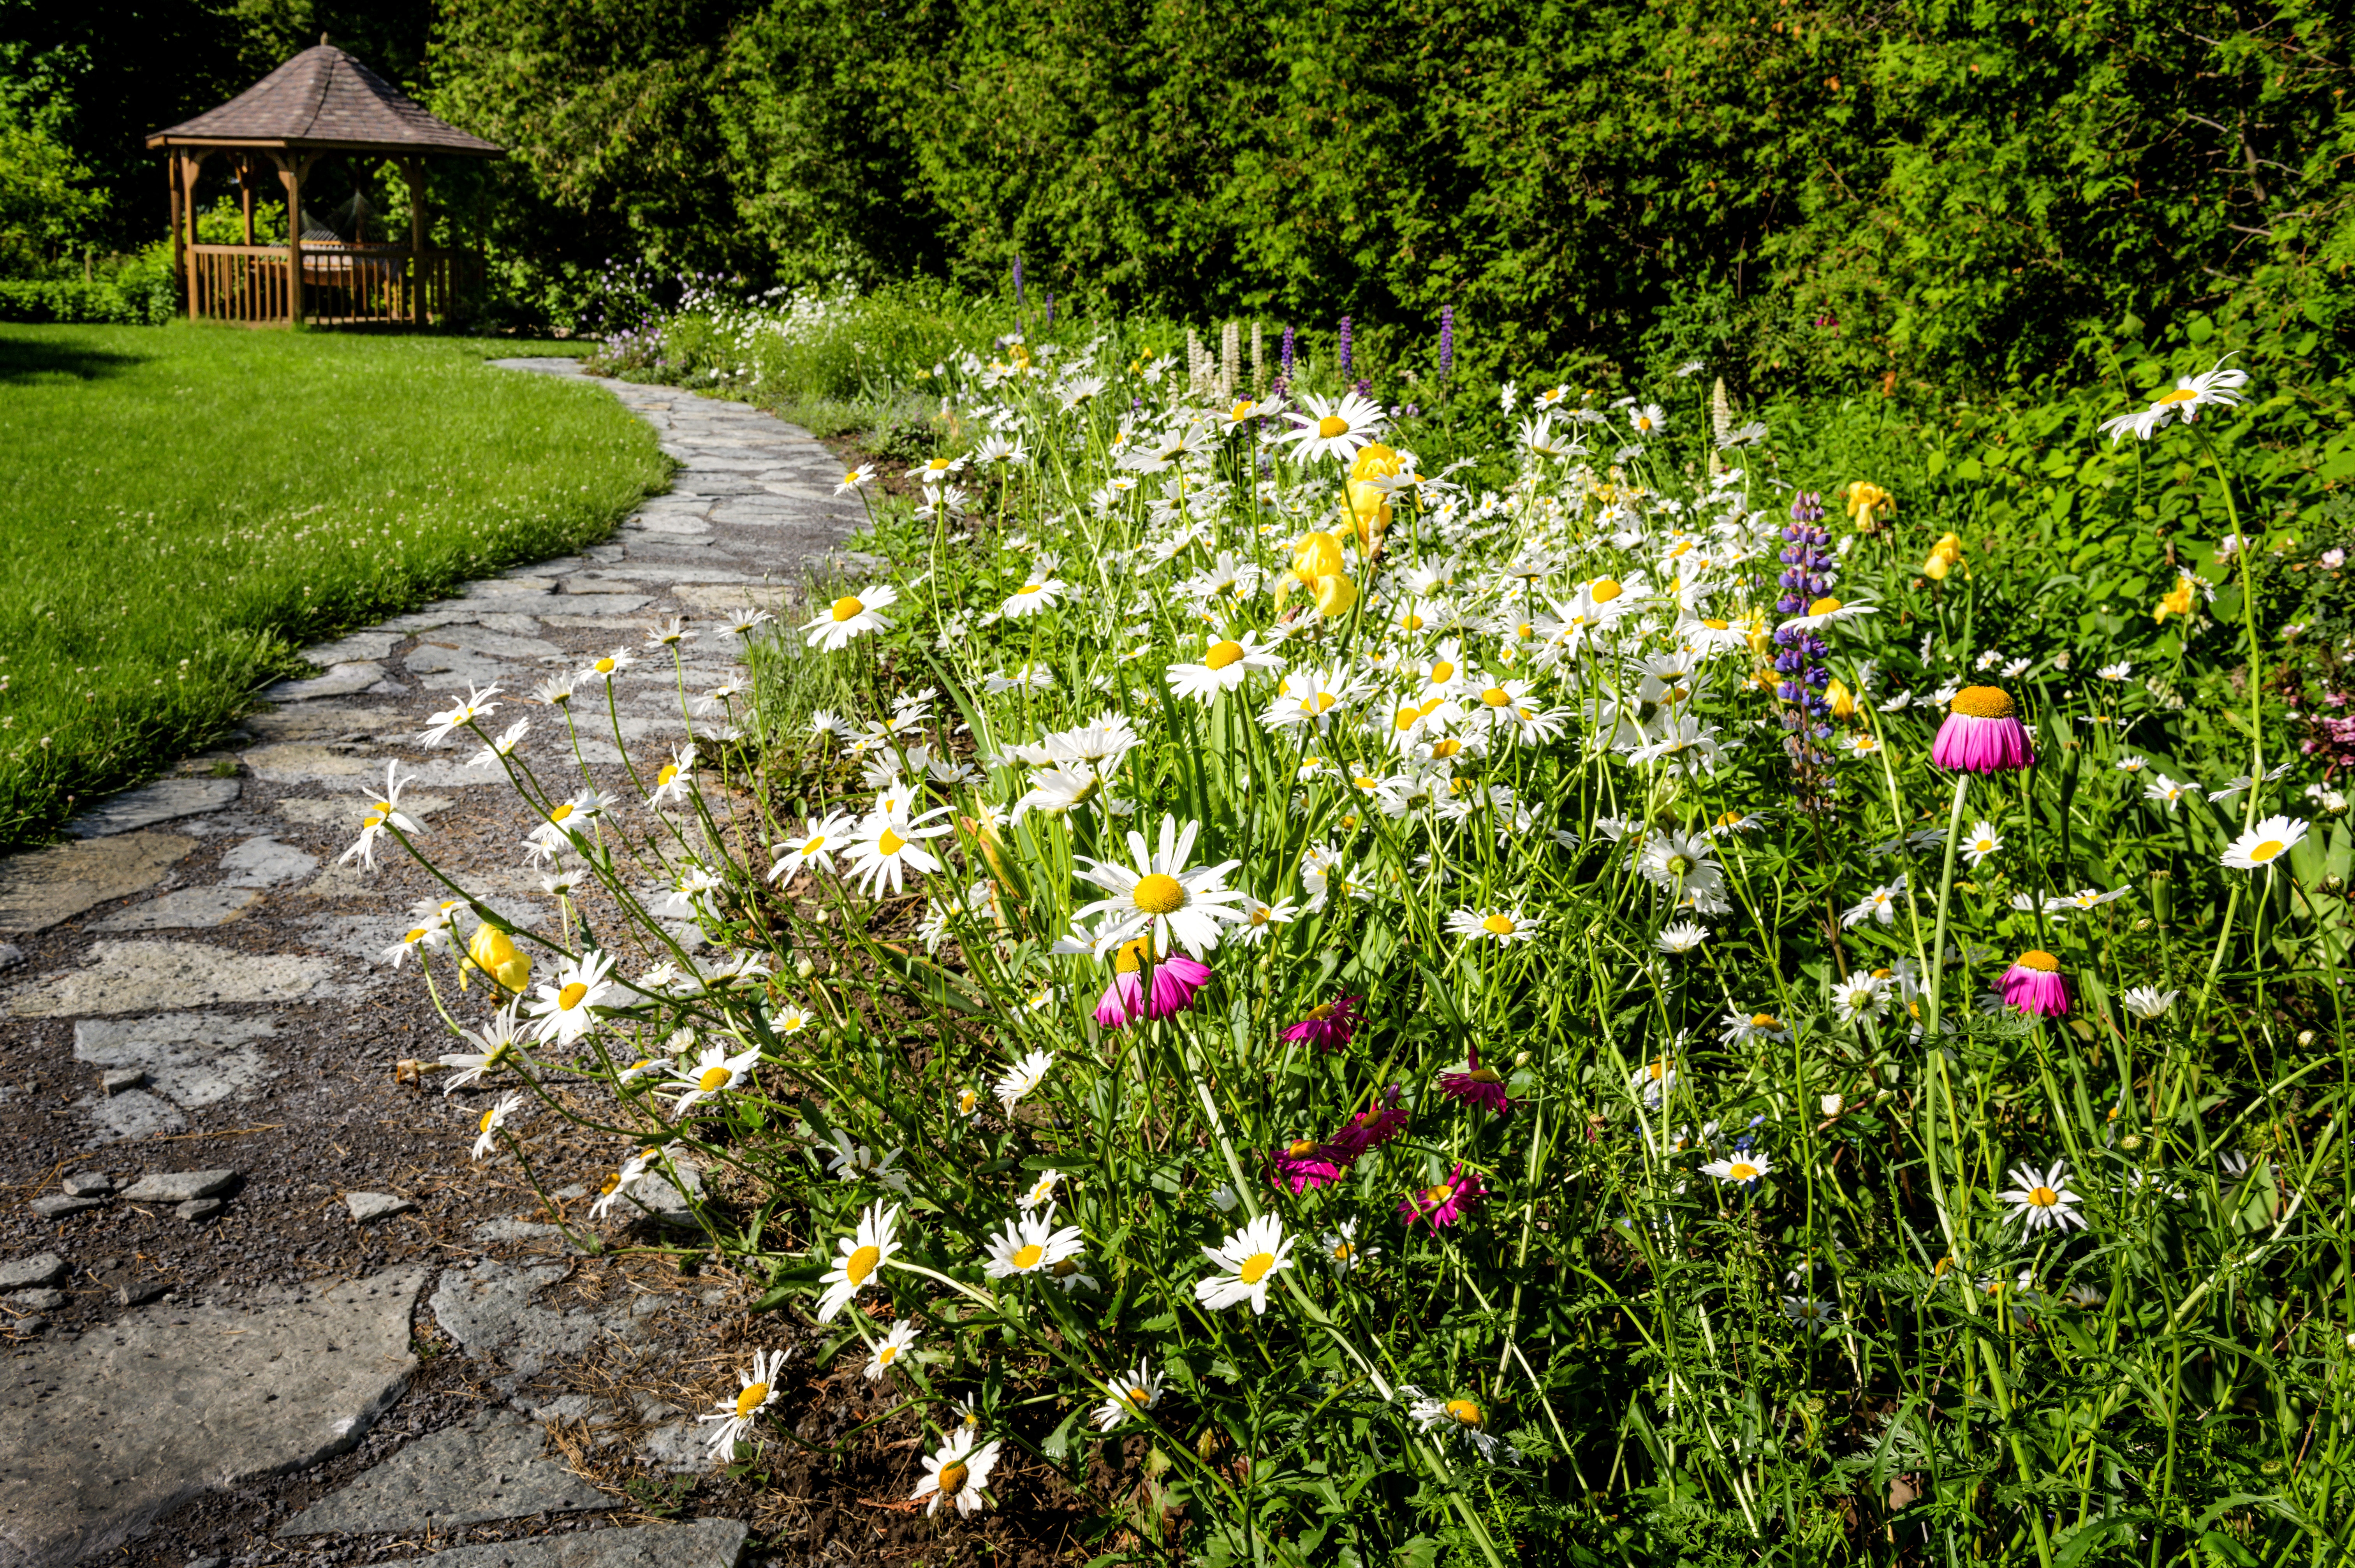 Wildflower garden with paved path leading to gazebo and blooming daisies